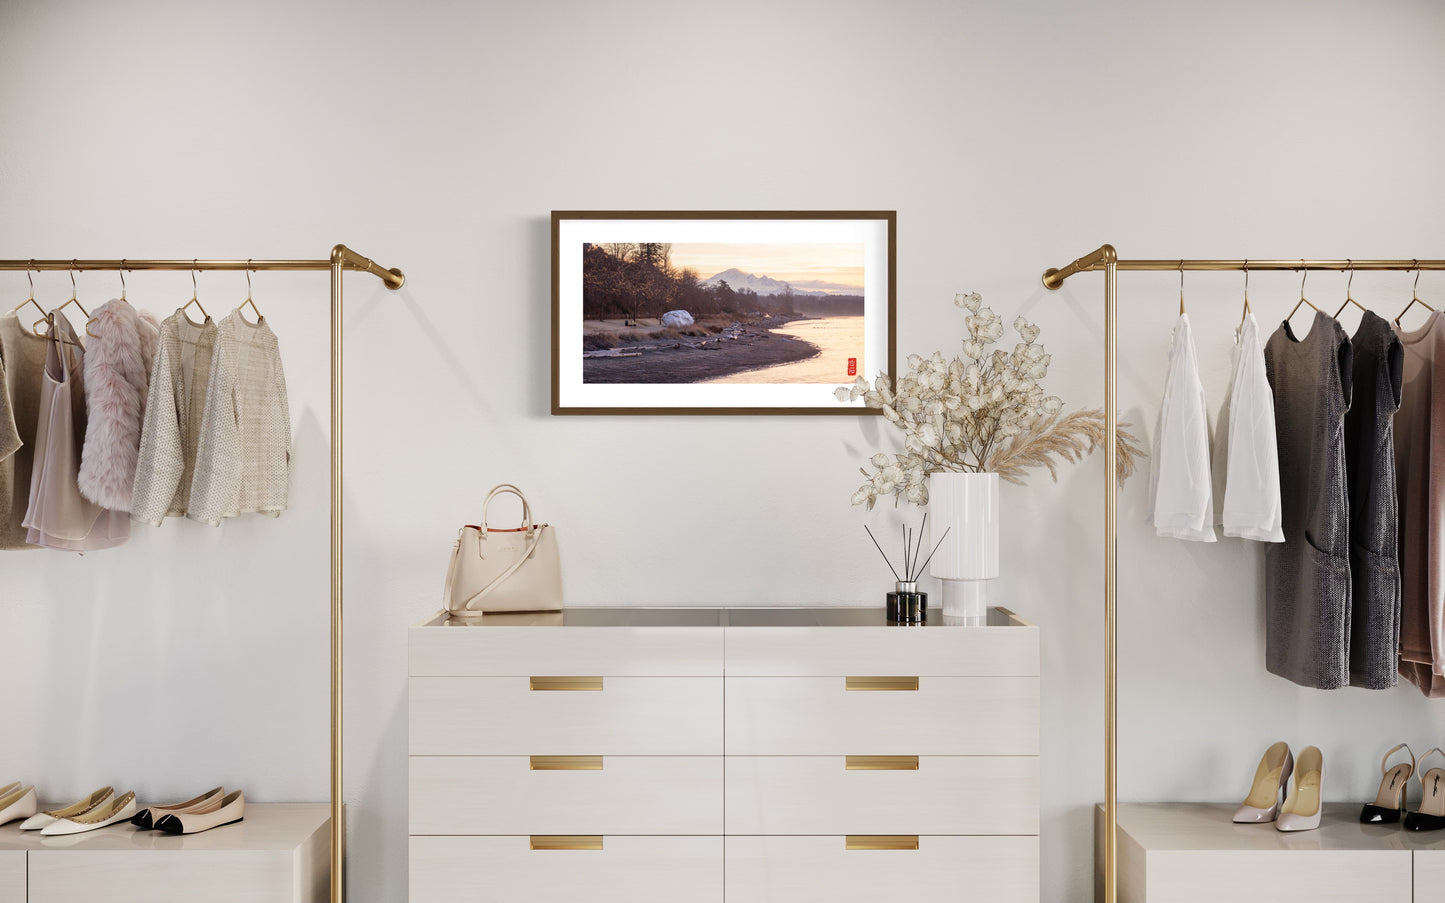 Rock & Mountain: 15*30 photo with solid wood frame